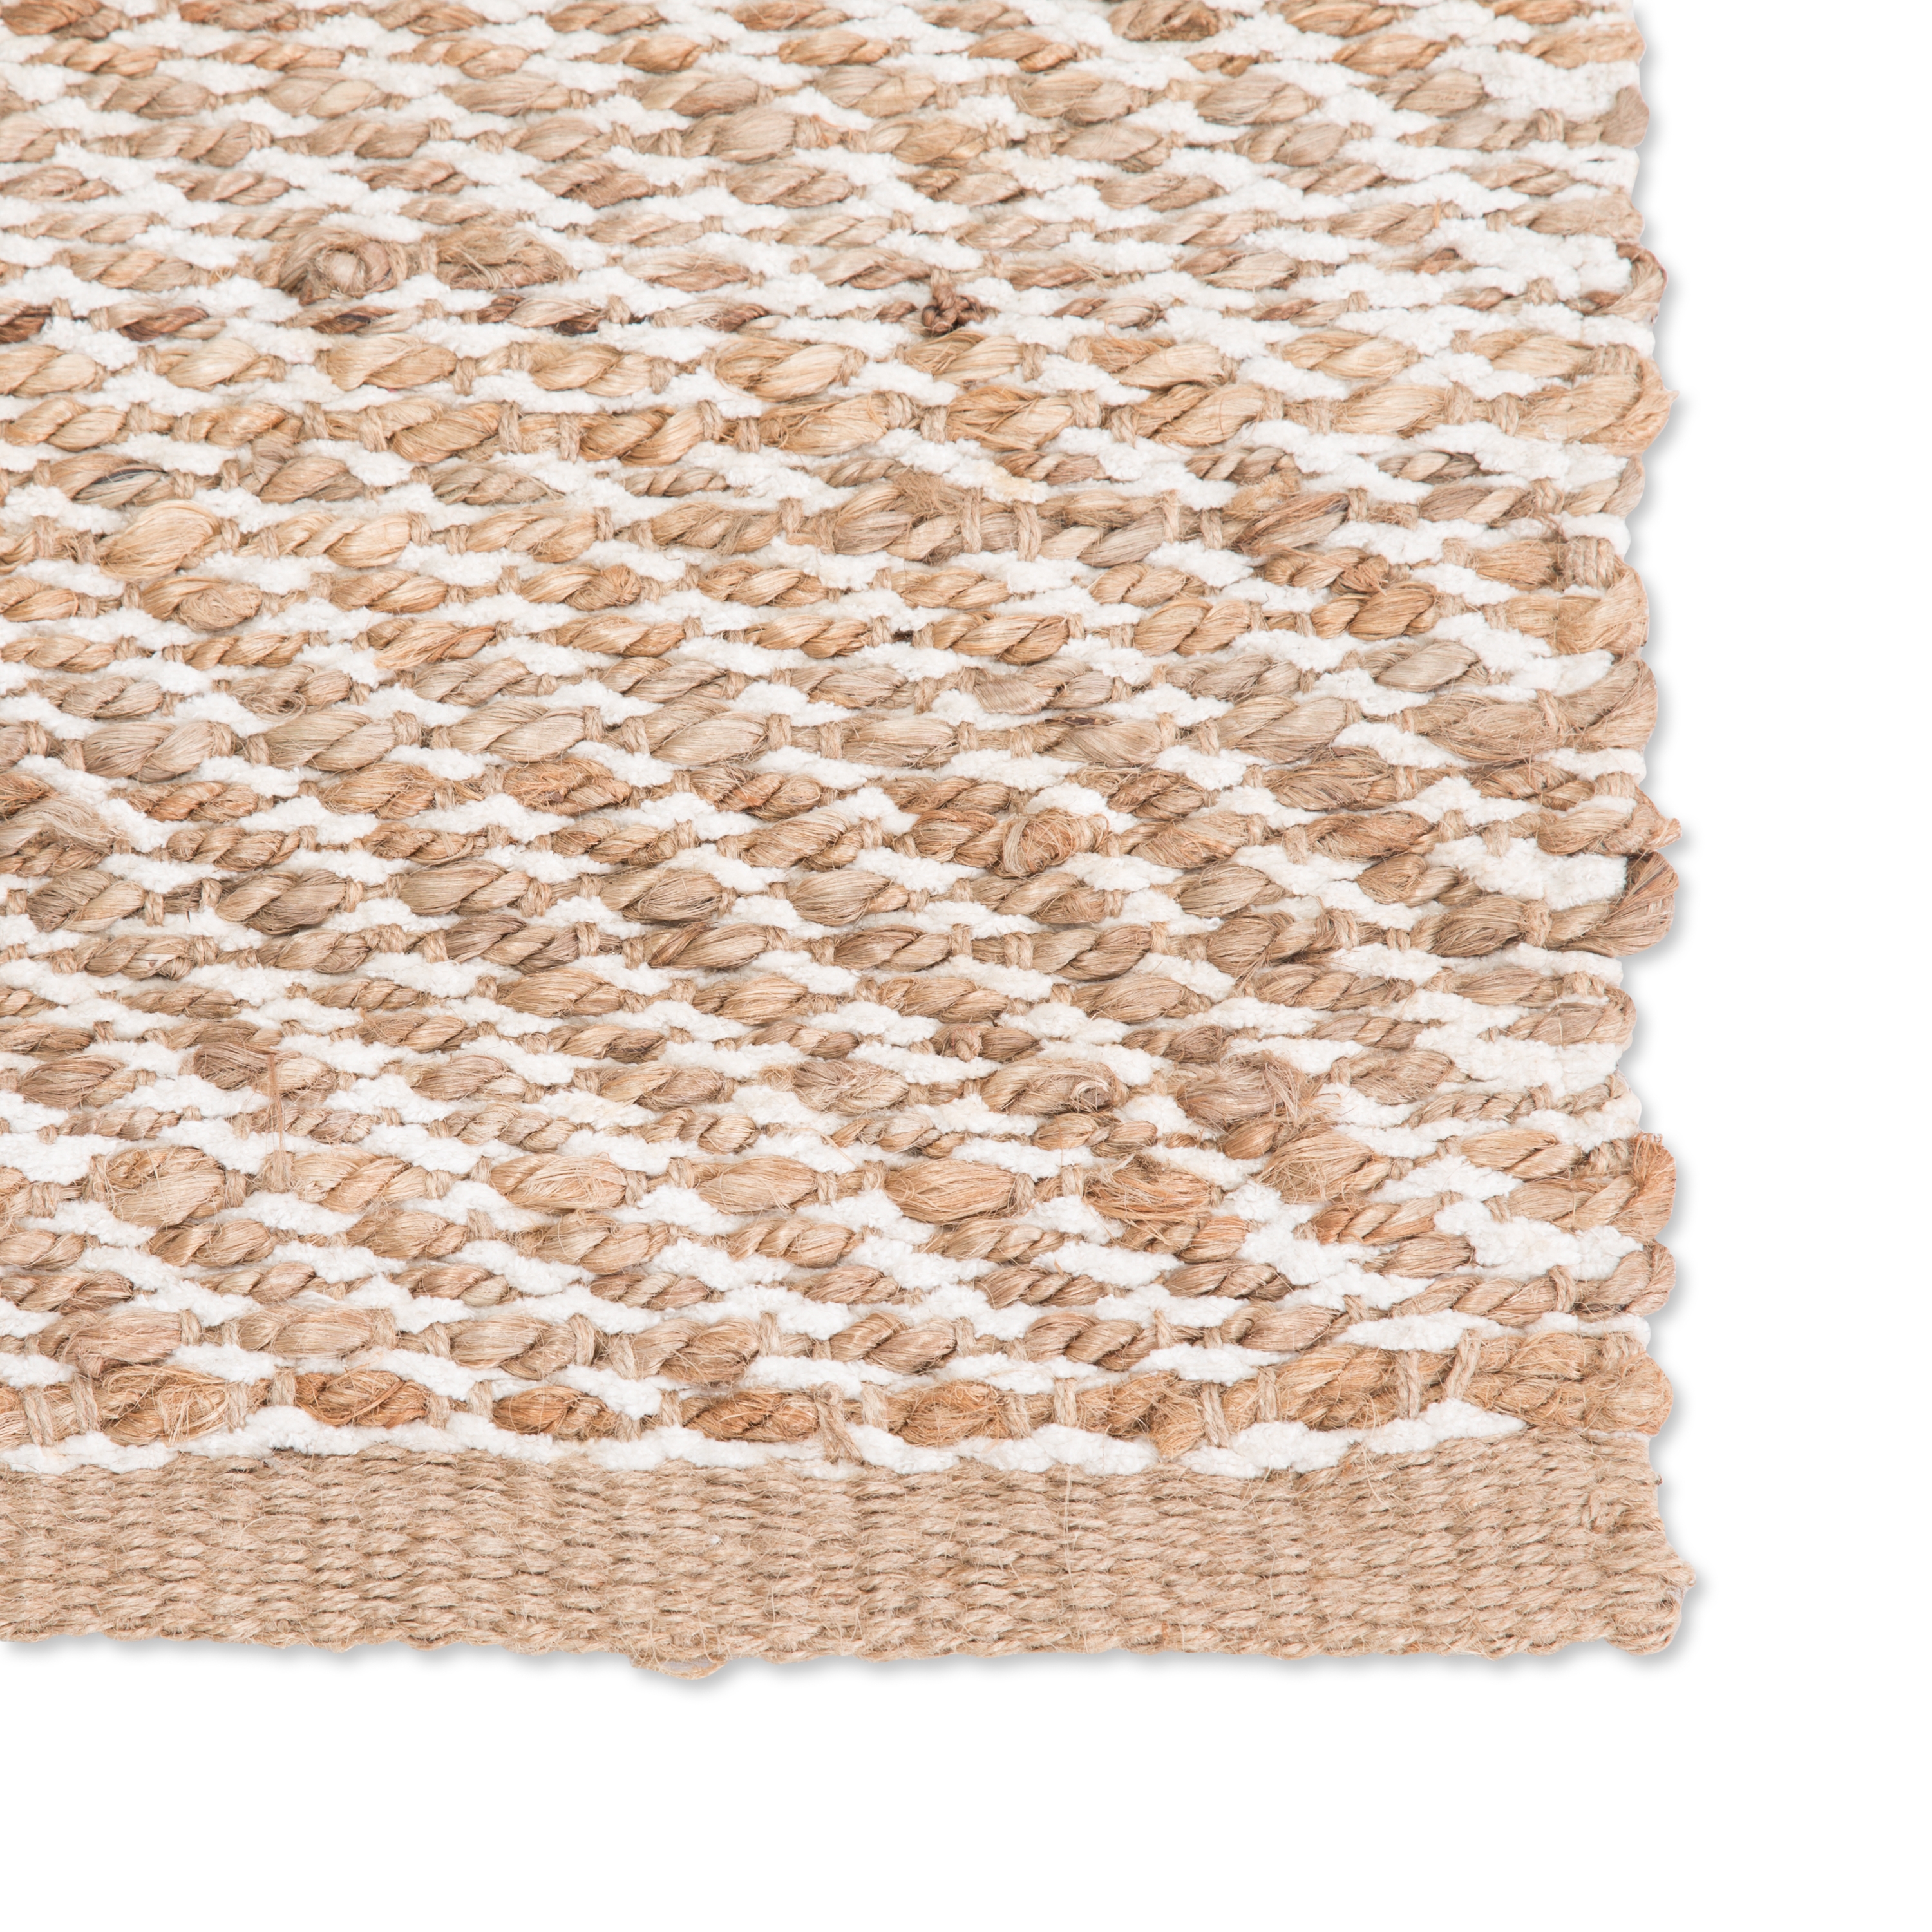 Diagonal Weave Natural Solid Beige/ White Area Rug (8' X 10') - Image 3